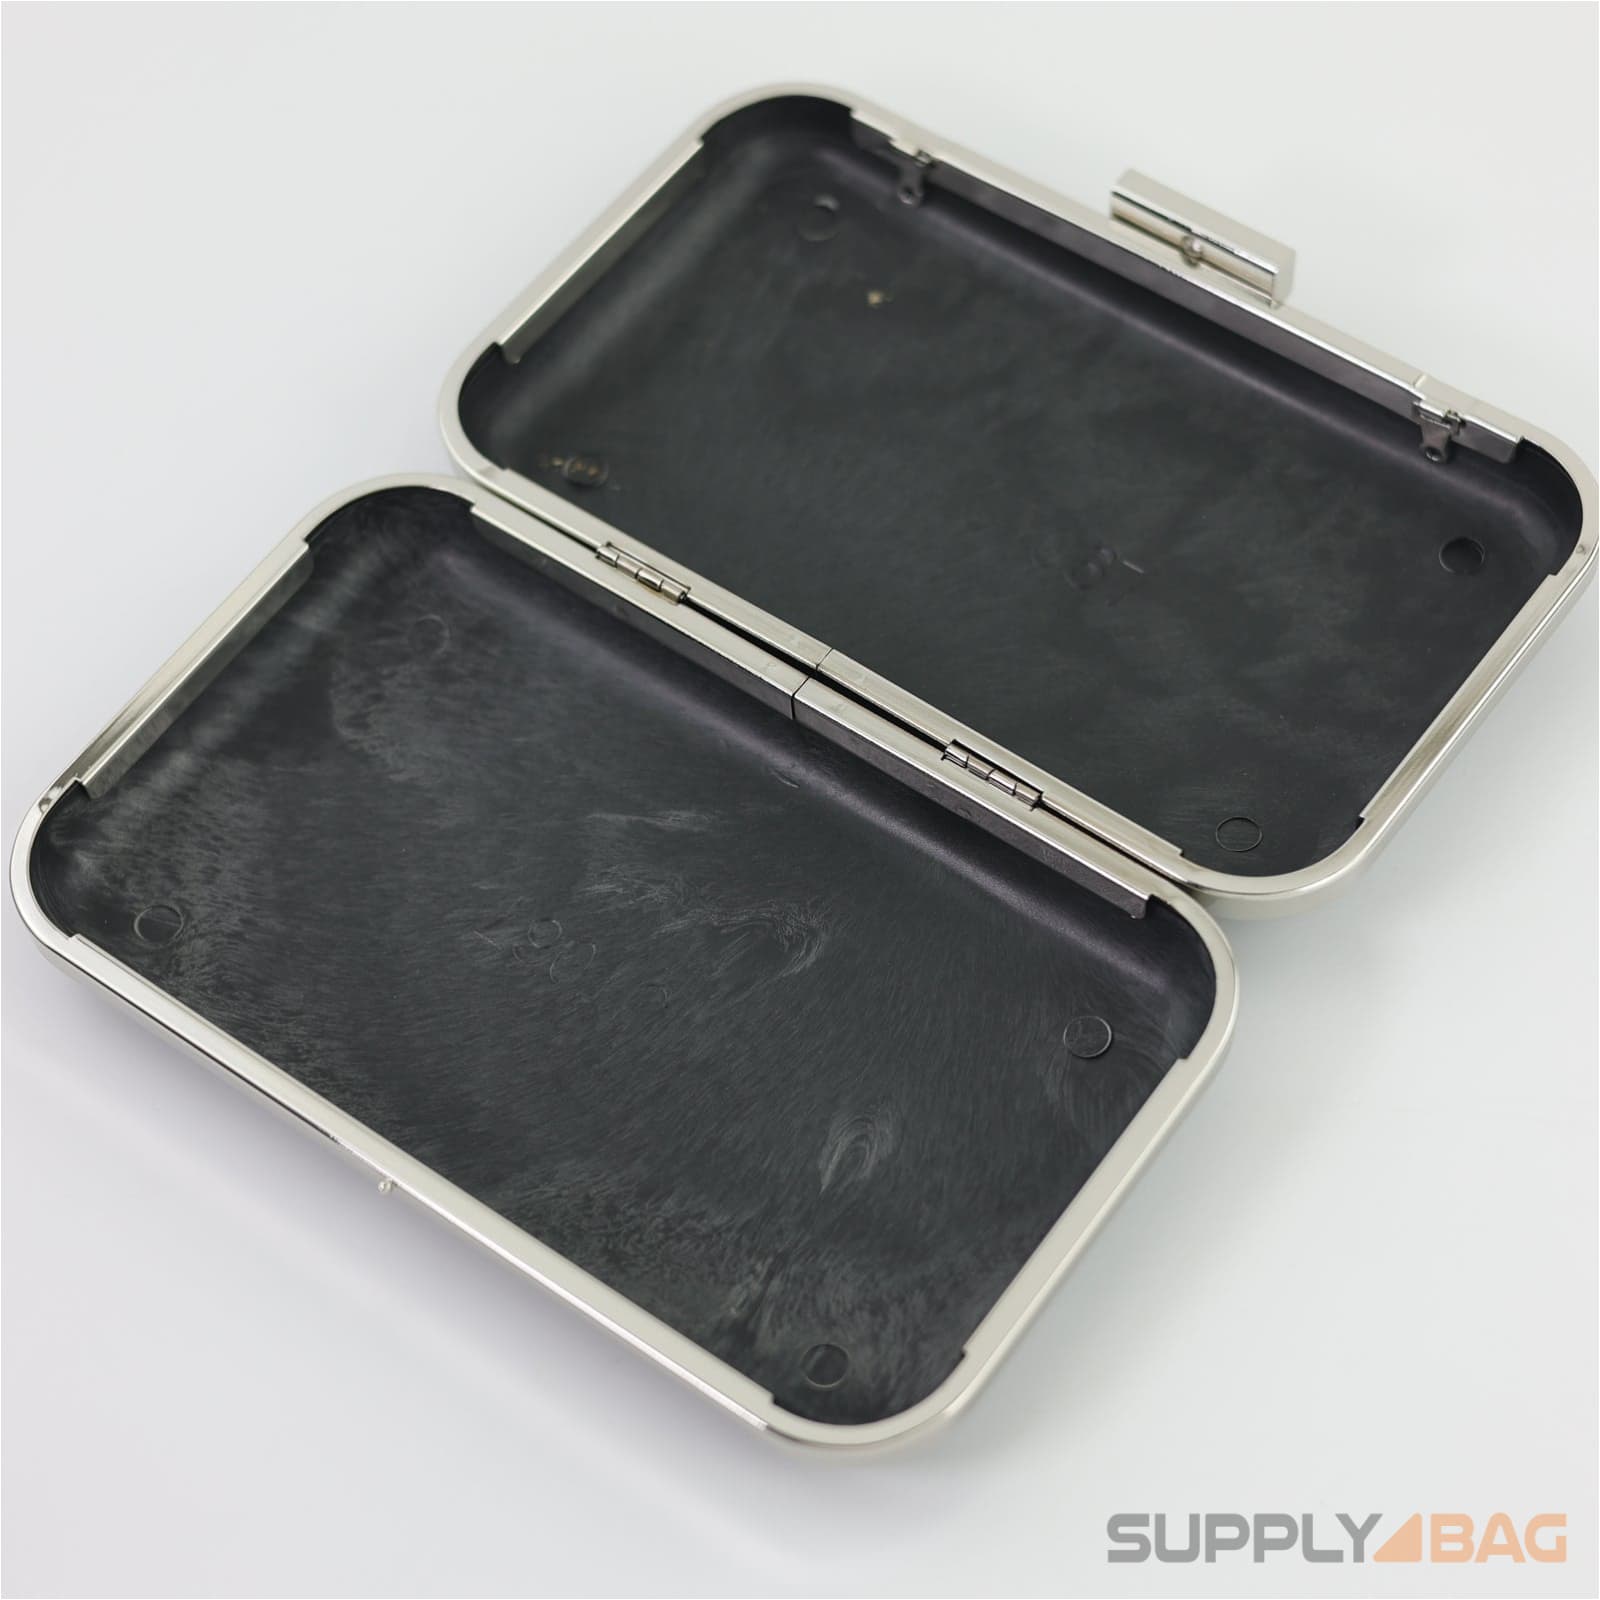 8 x 4 3/4 inch - silver clamshell clutch frame with covers